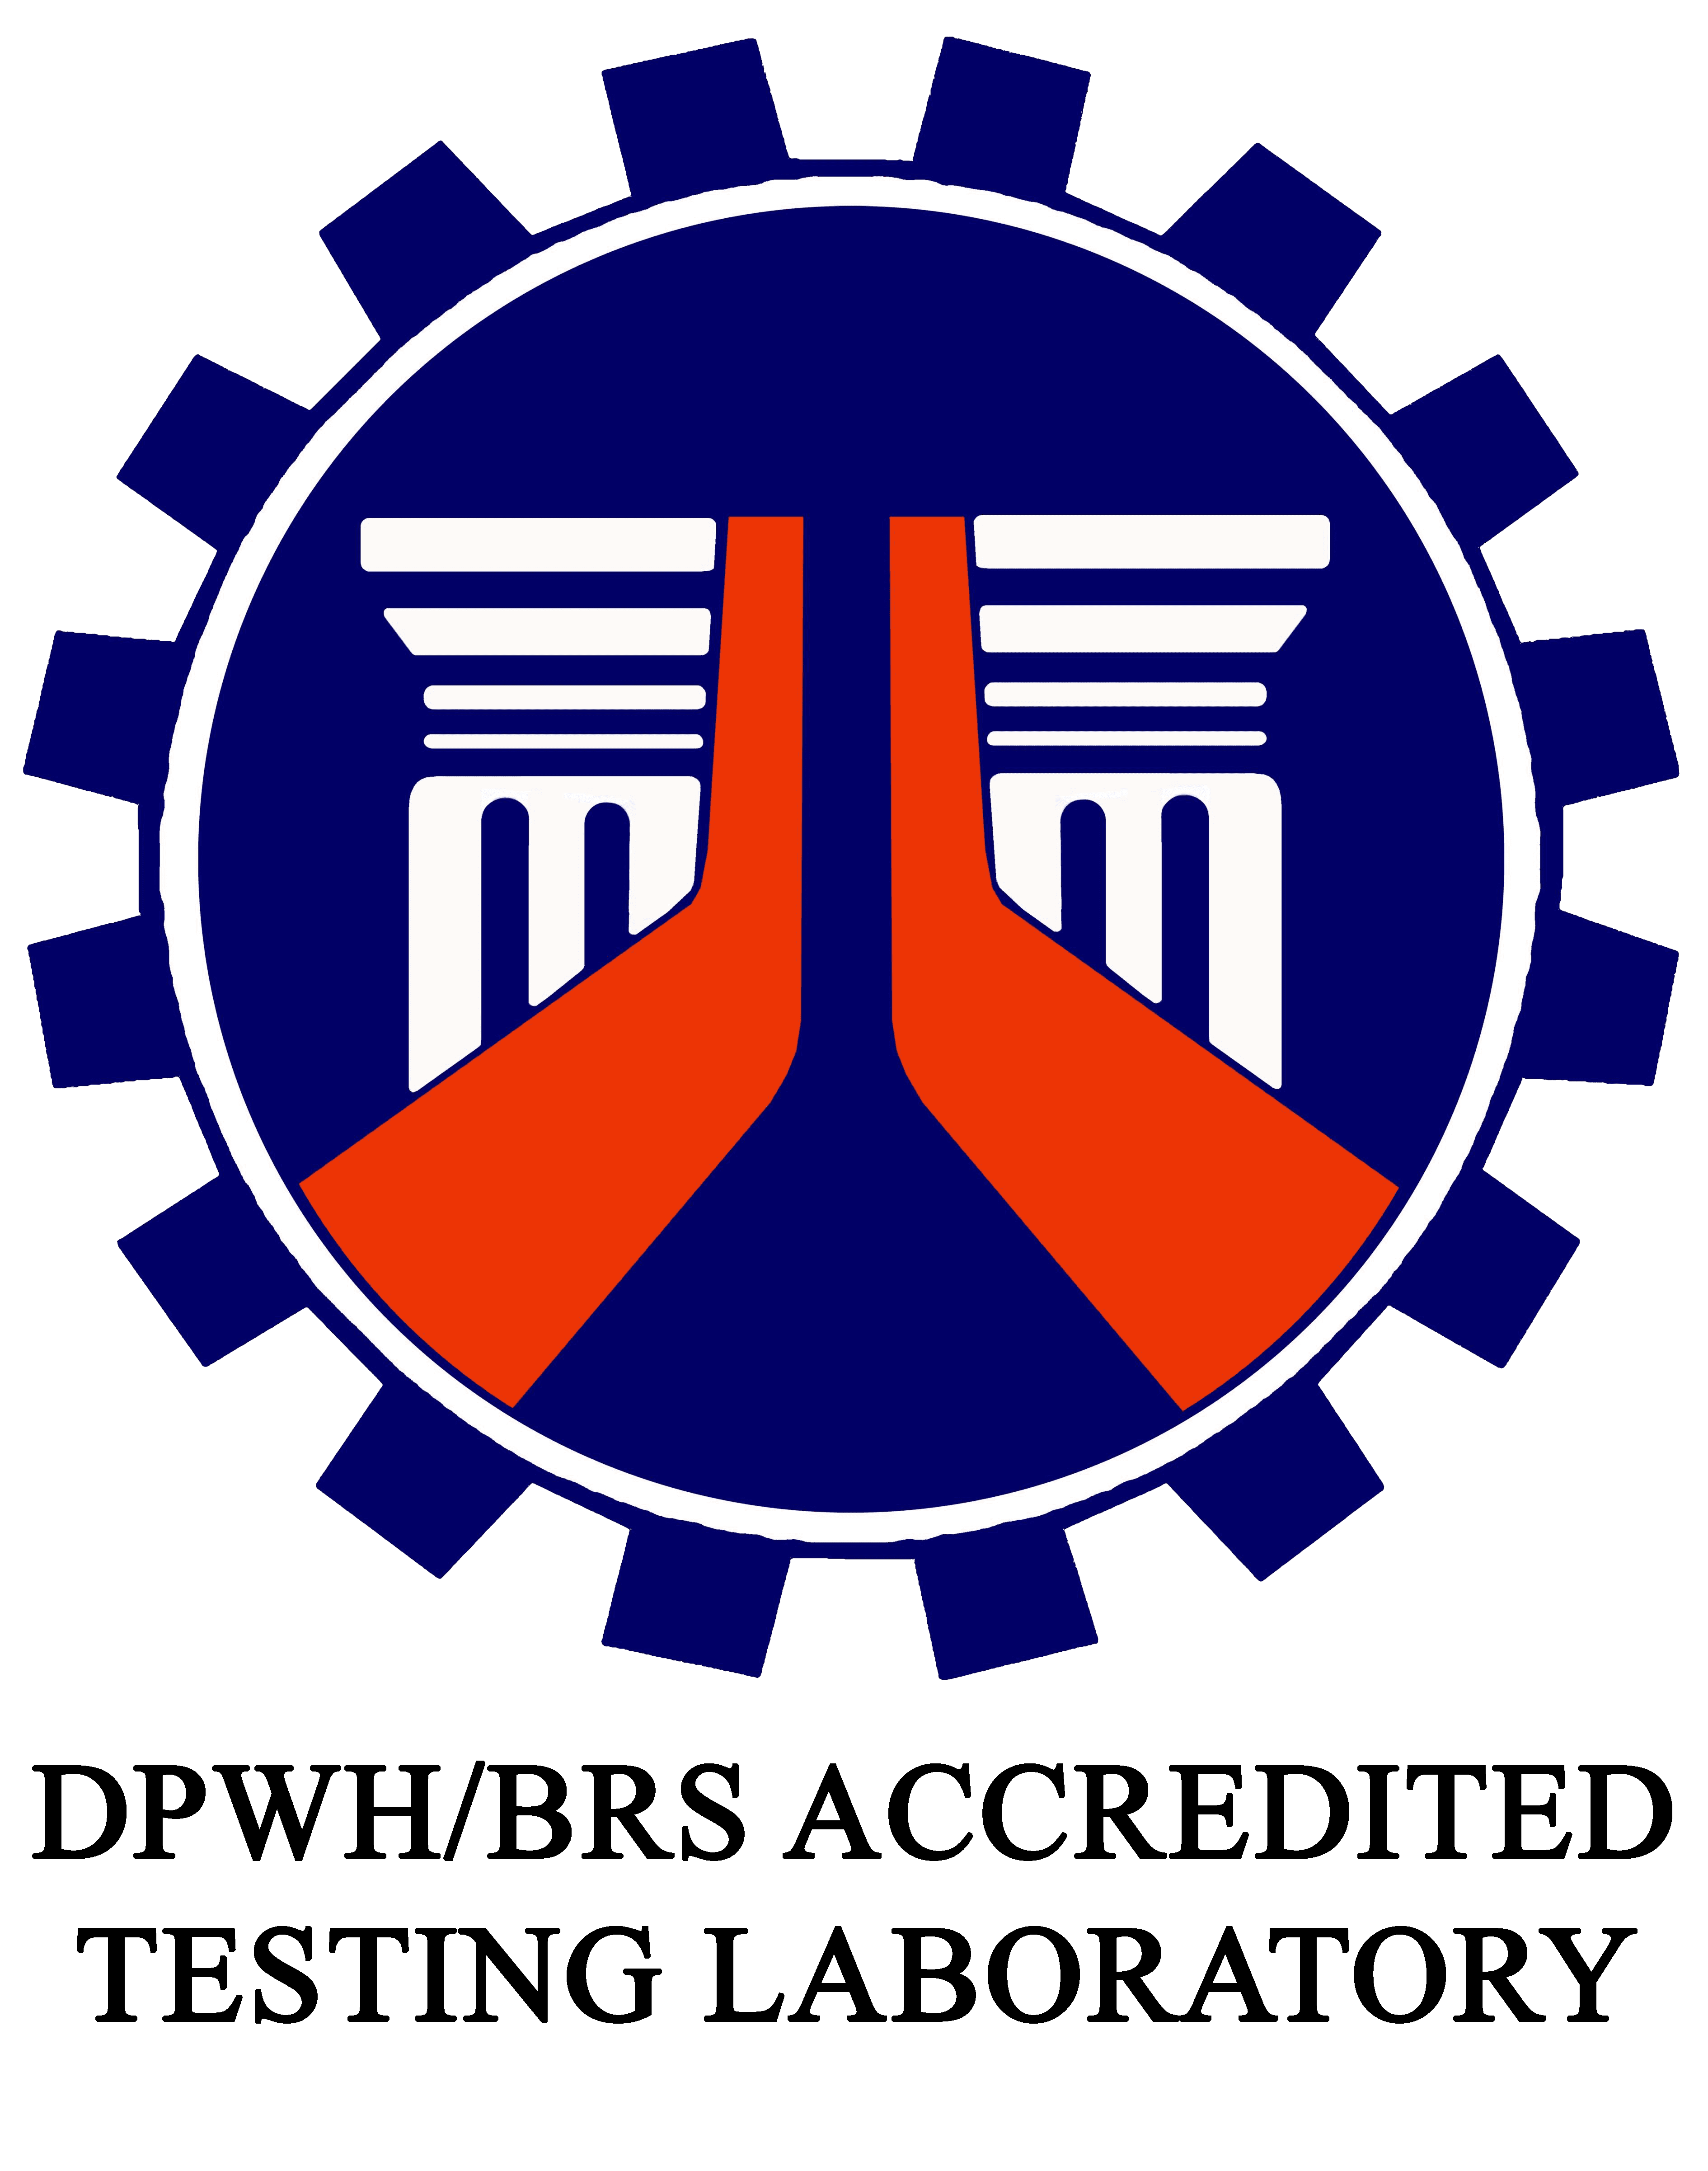 DPWH BRS Accredited Testing Laboratory